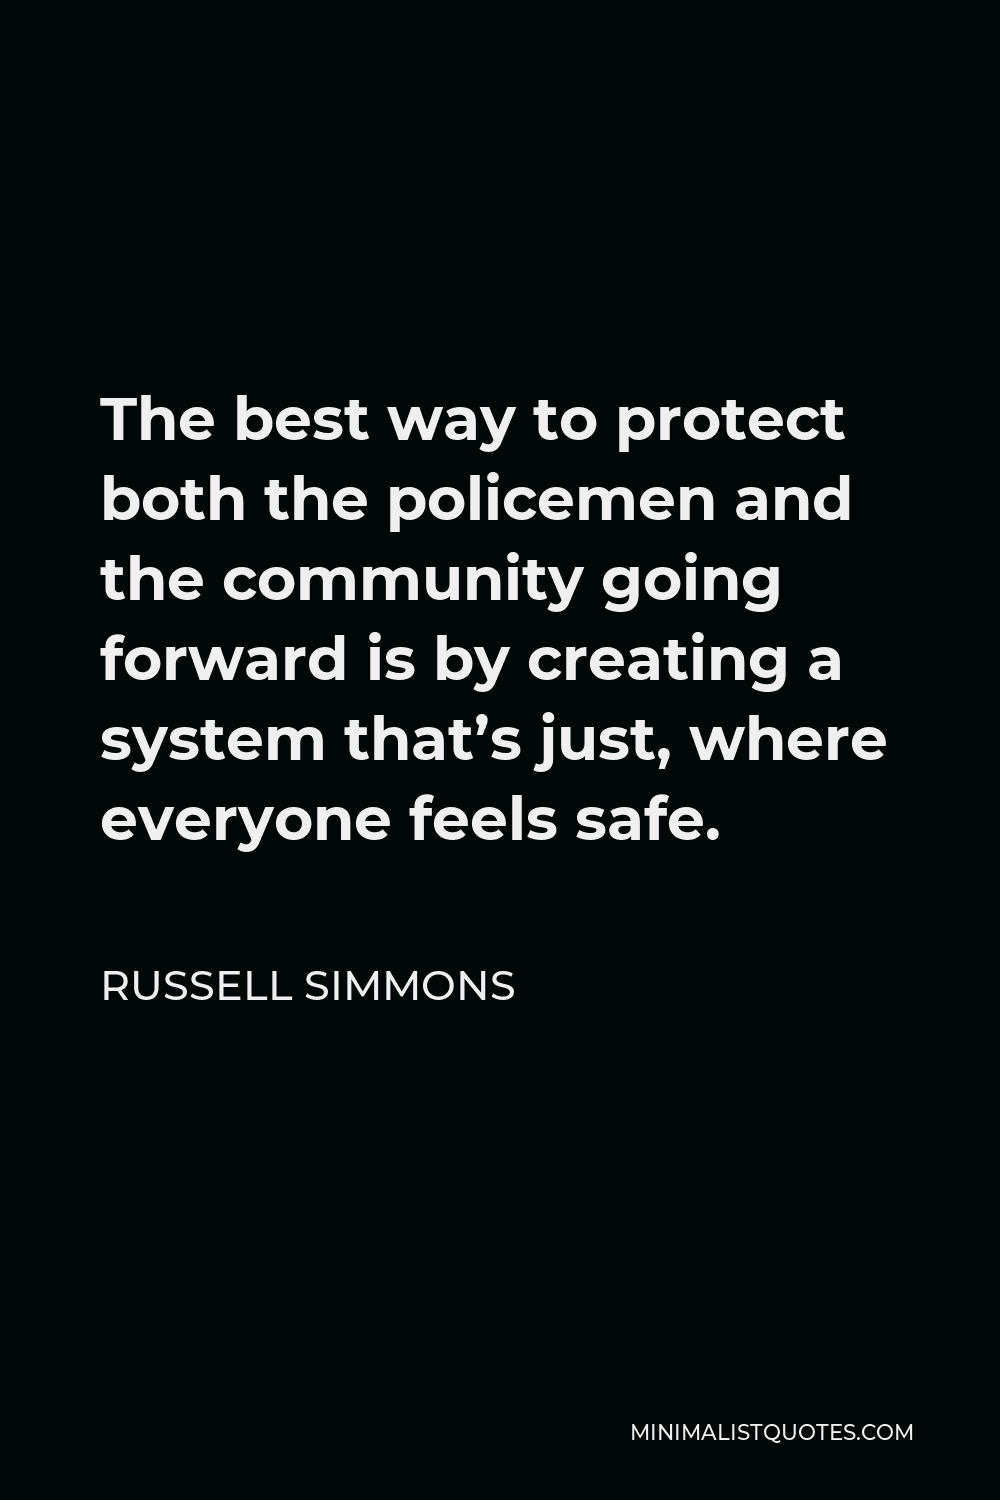 Russell Simmons Quote - The best way to protect both the policemen and the community going forward is by creating a system that’s just, where everyone feels safe.